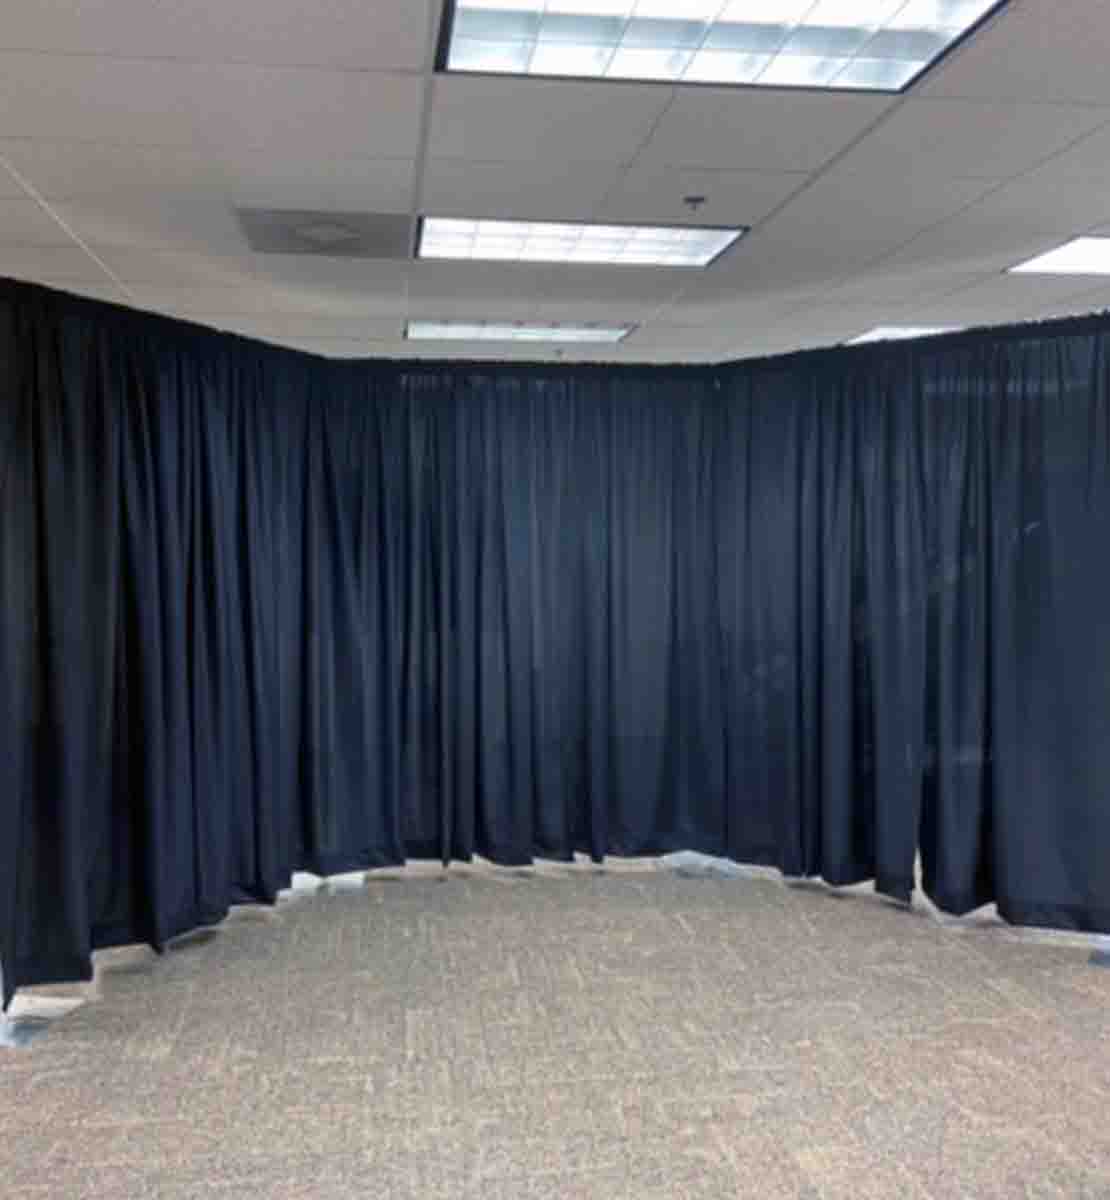 ADJUSTABLE QUICK BACKDROP KIT 8 FT TALL x 20 FT 50 FT WIDE PIPE WITHOUT DRAPE